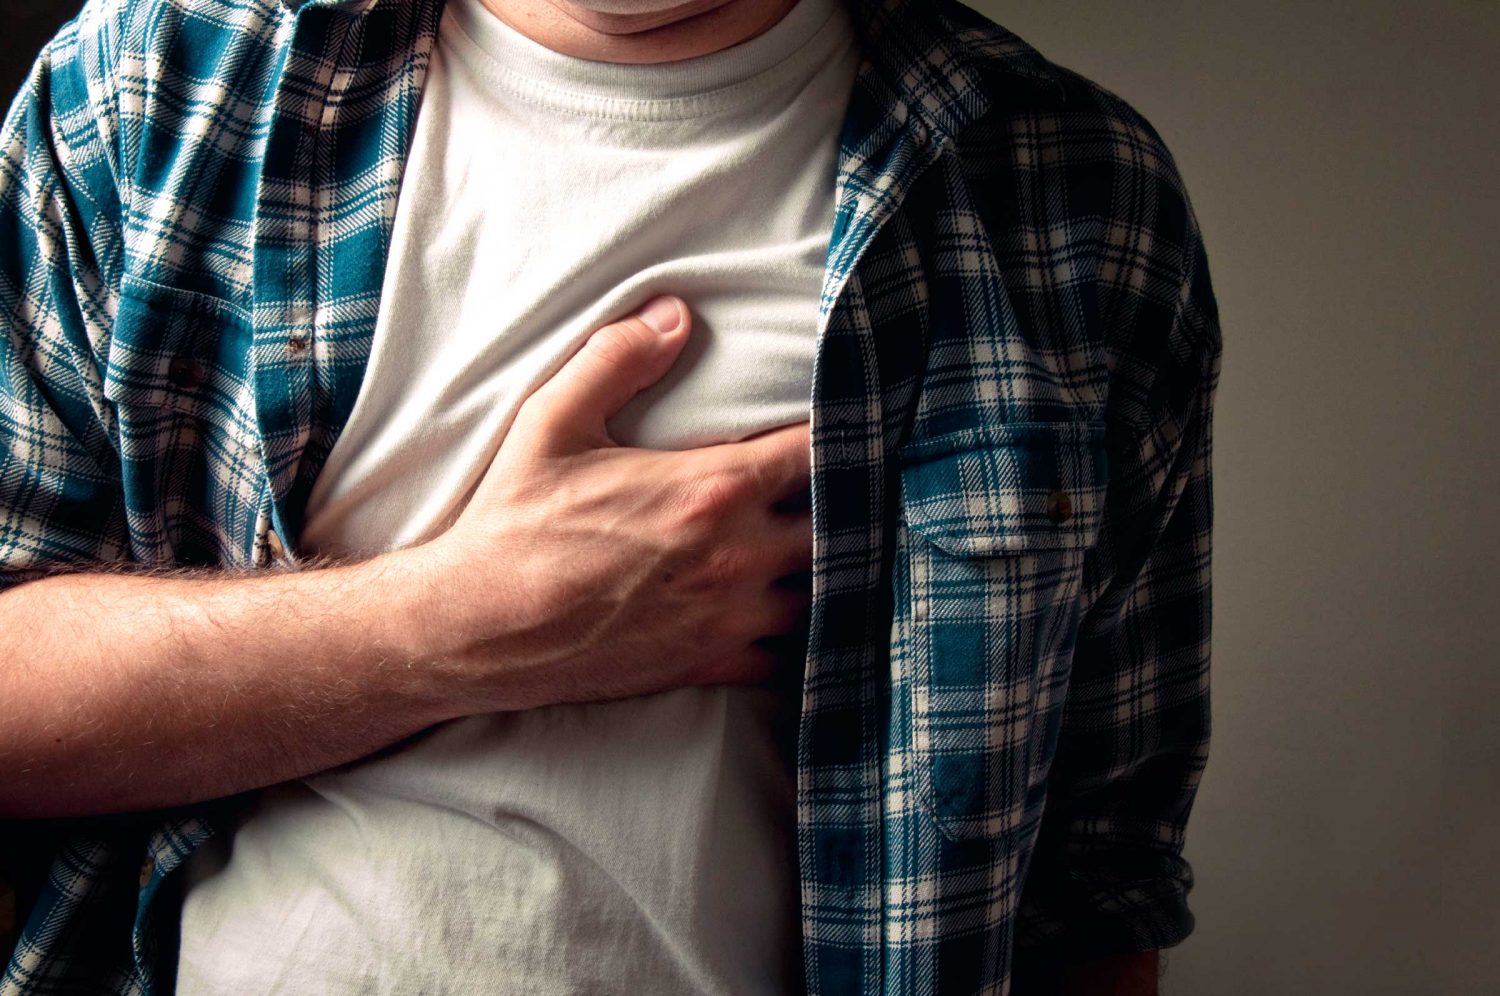 Is It Really A Heart Attack? How To Tell If Your Having The Big One